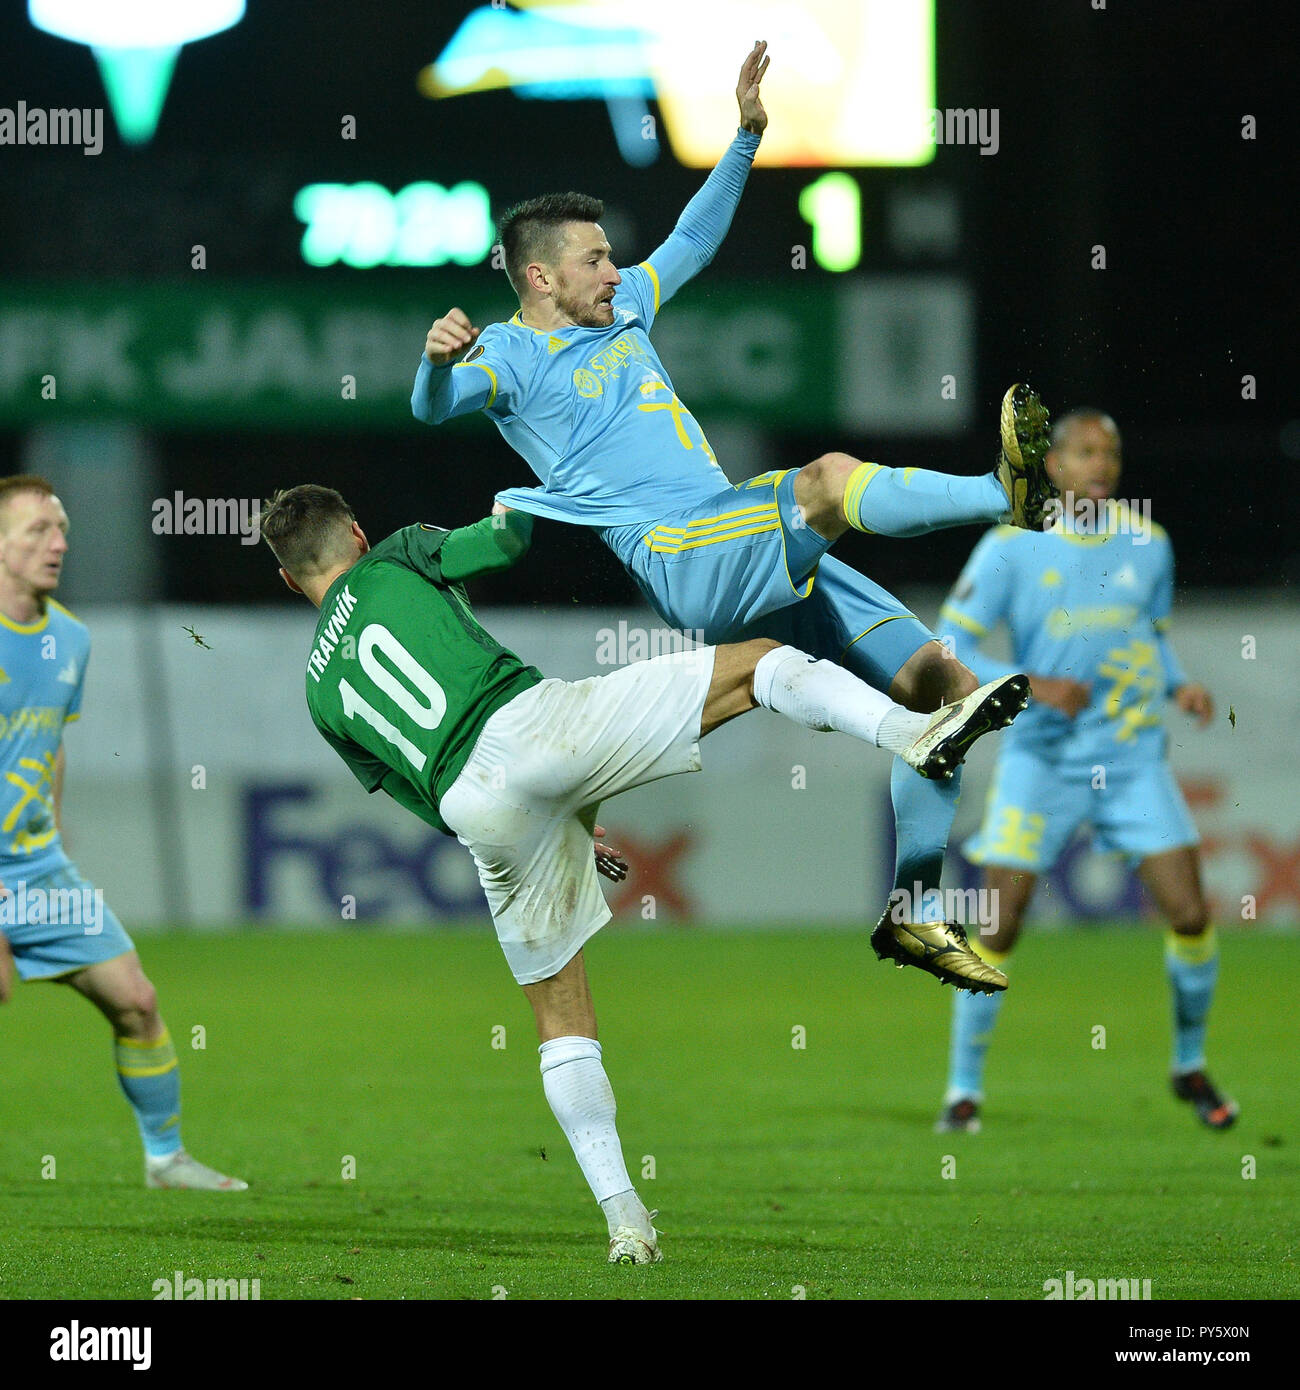 L-R Michal Travnik (Jablonec) and Antonio Rukavina (Astana) in action during the 3rd round of the European UEFA Europa League, match FK Jablonec vs FC Astana, in Jablonec nad Nisou, Czech Republic, on October 25, 201878. (CTK Photo/Vit Cerny) Stock Photo